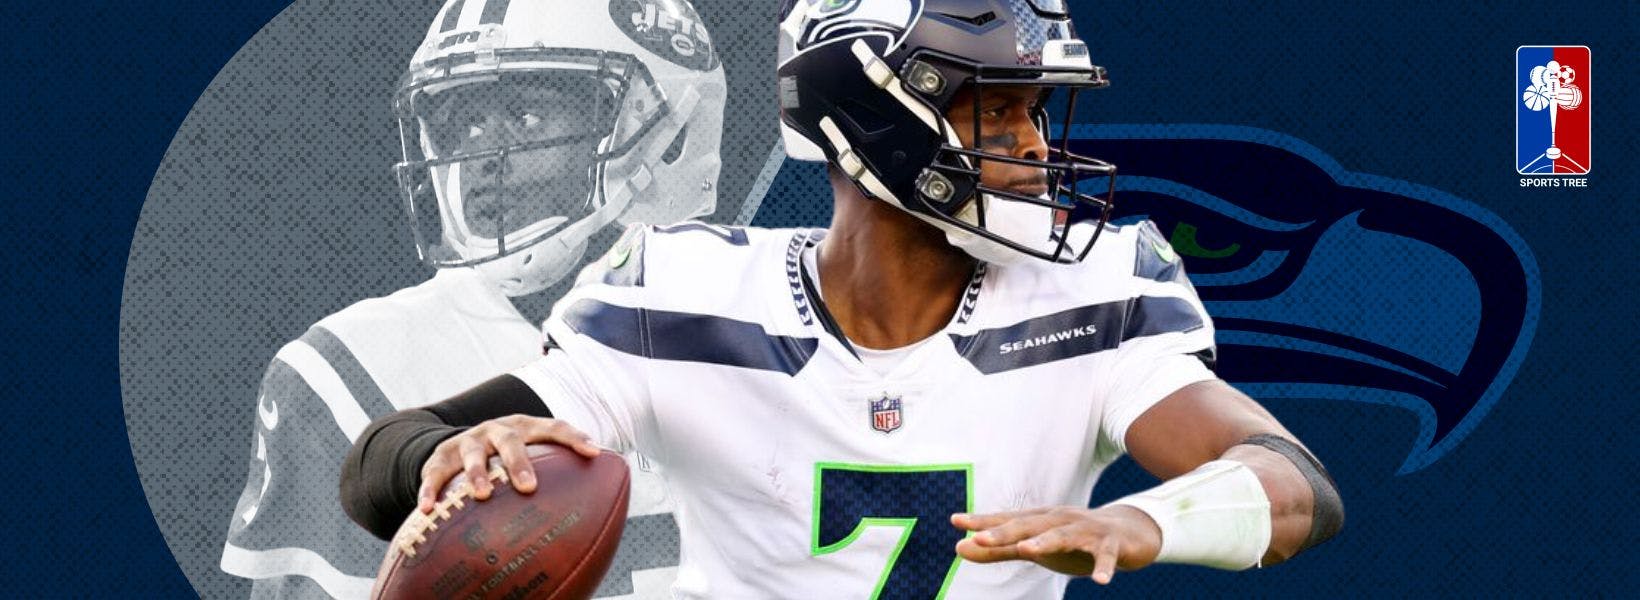 Seahawks sign Geno Smith to a three-year extension